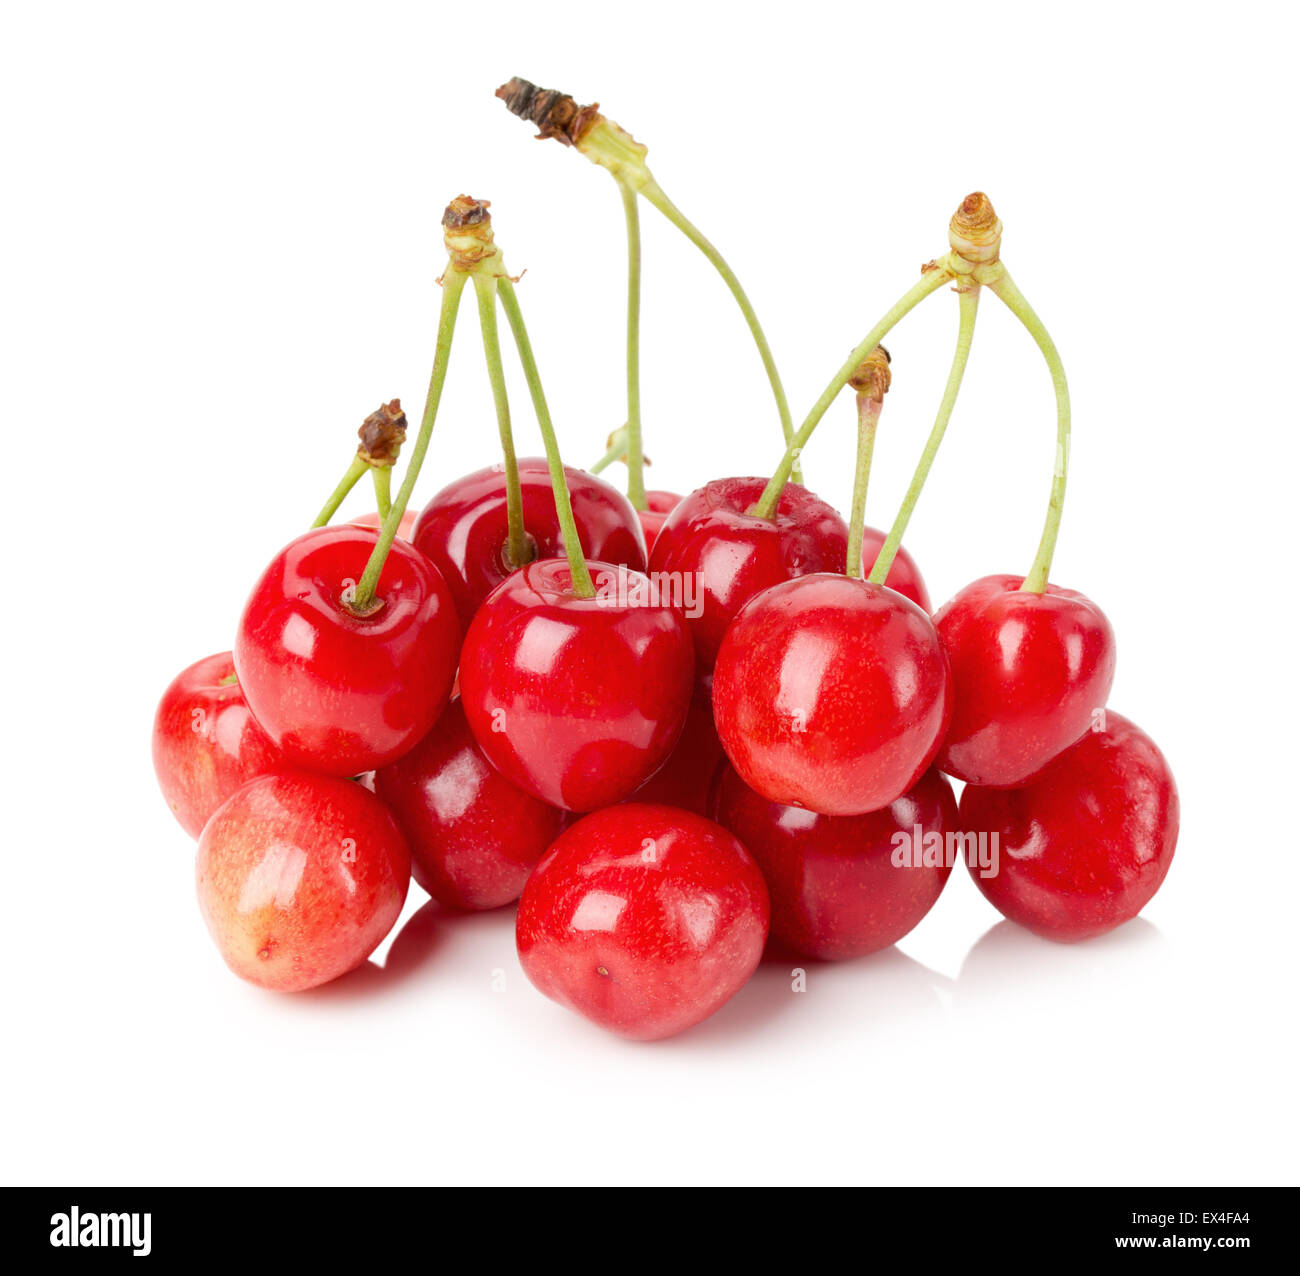 Handful of a red cherry on the white background. Stock Photo